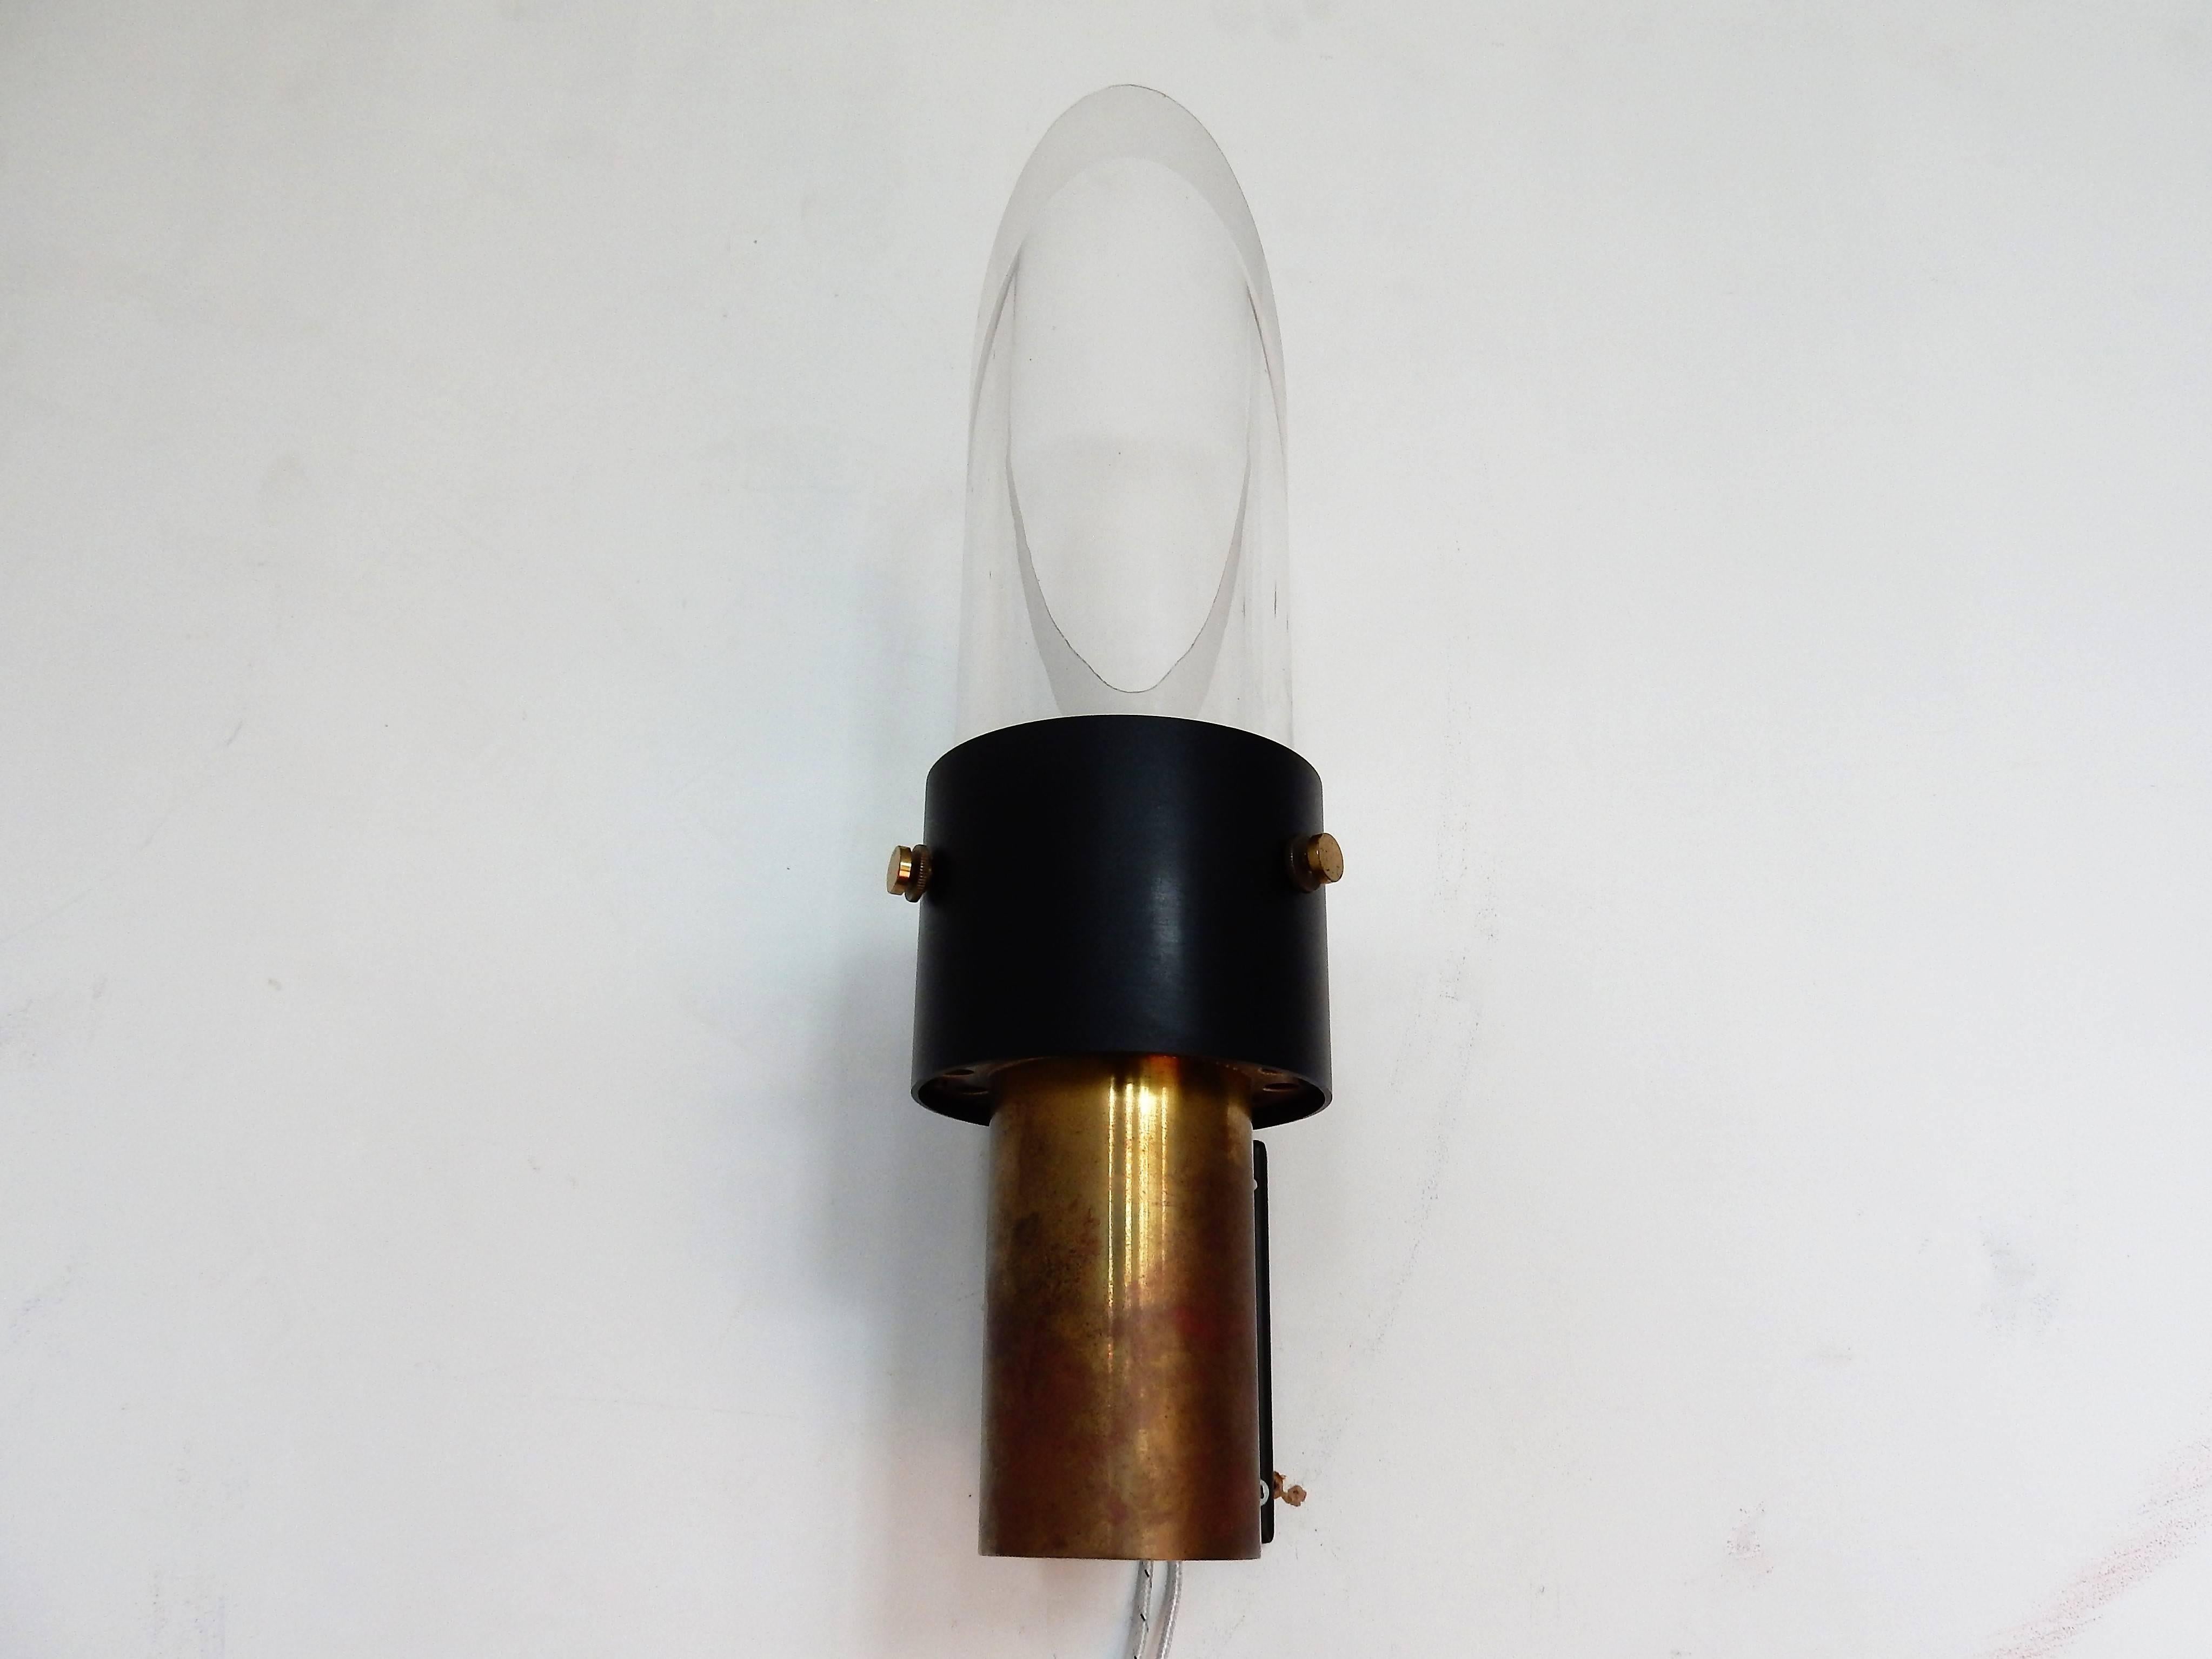 This midcentury wall lamp, model 'Saga' was made by Lyfa in Denmark in collaboration with the Swedish company Orrefors. It is made of metal, brass and crystal glass. The wall lamp can be placed upside down and vice versa. It is in a very good